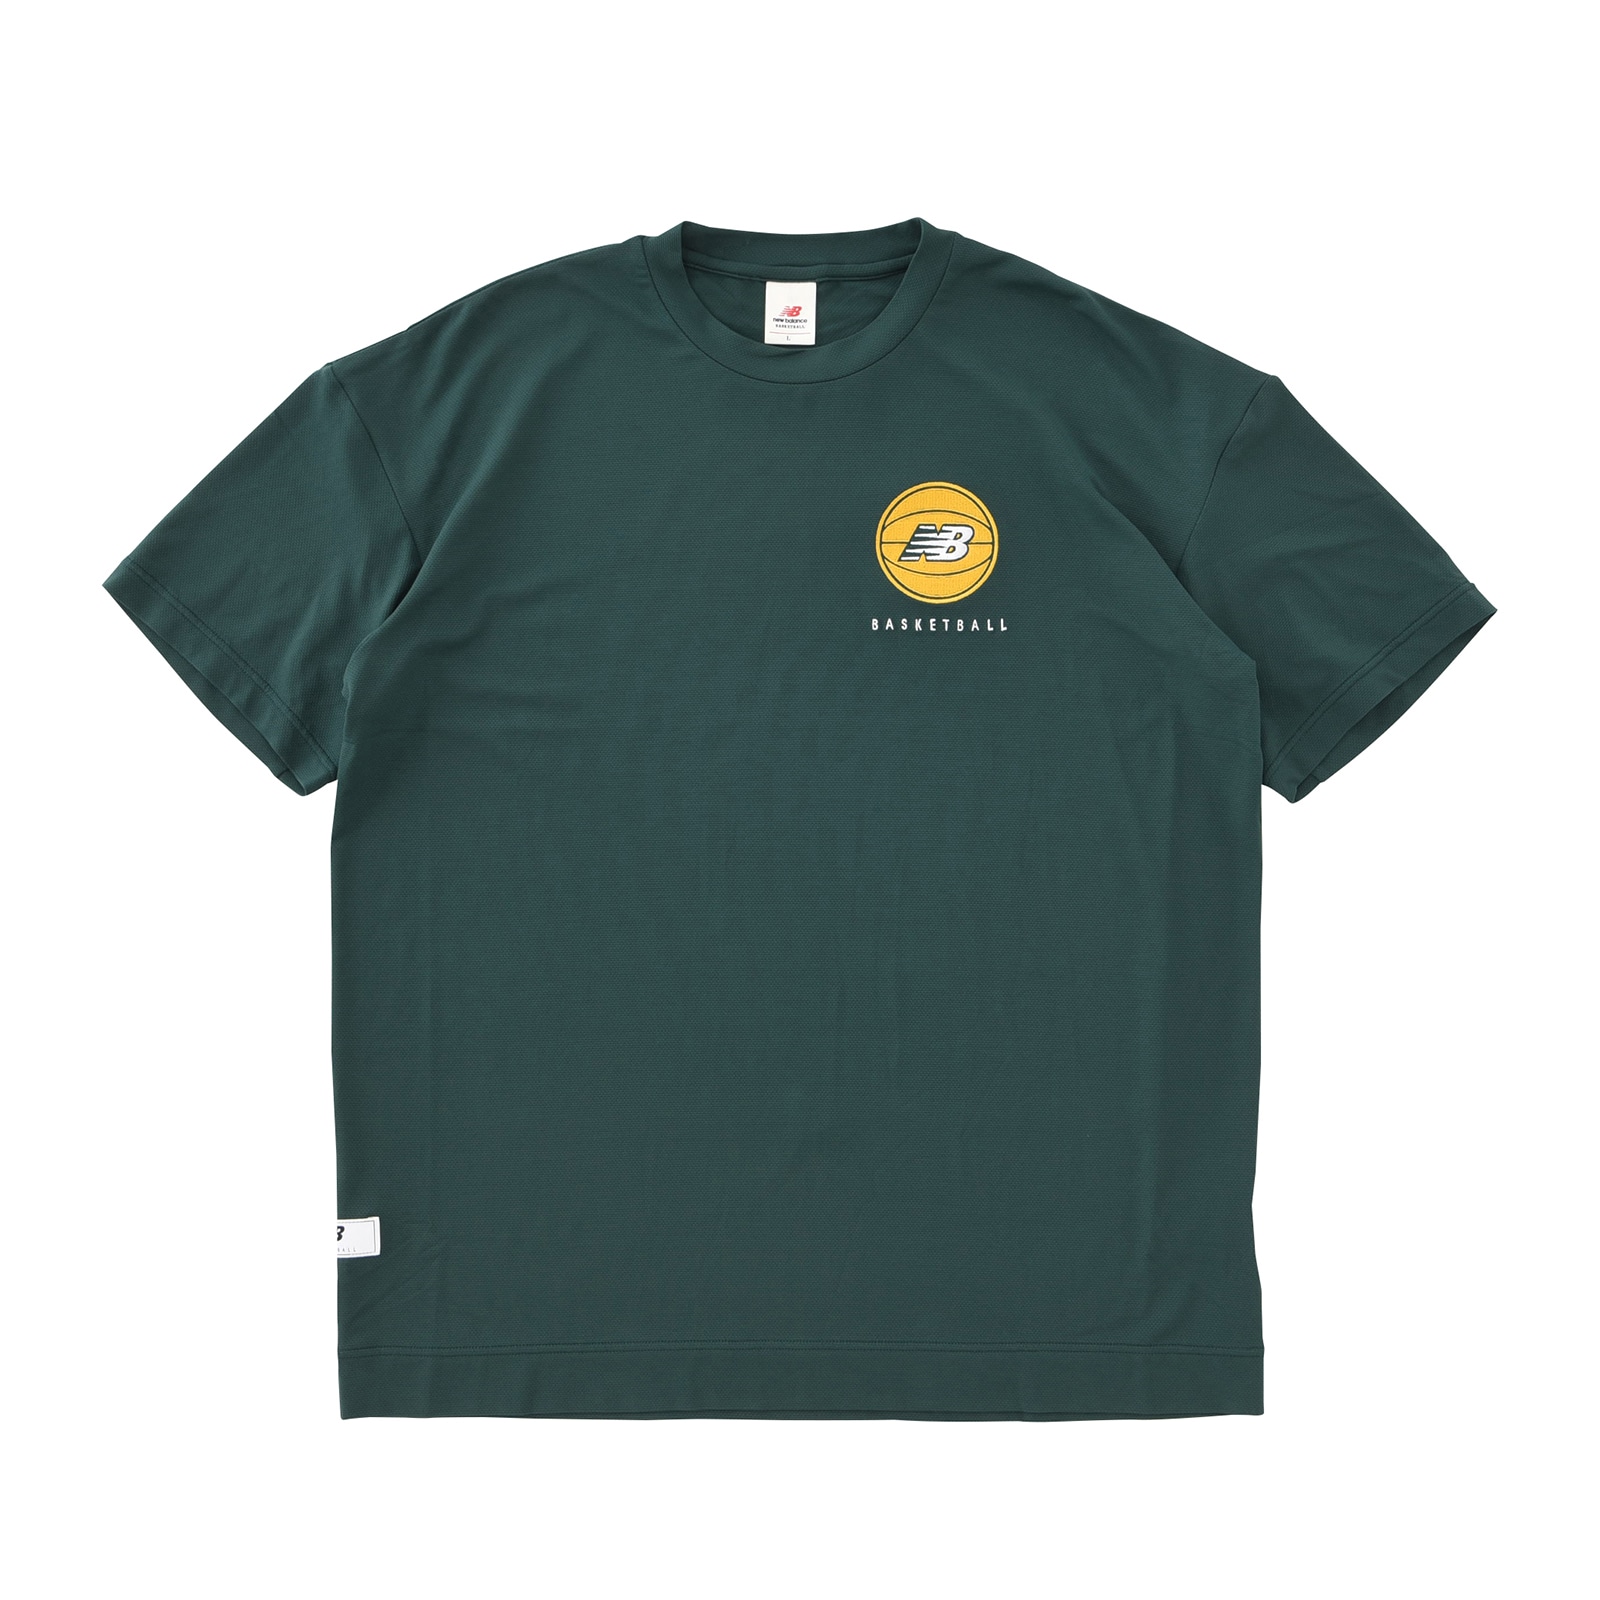 Cool-to-the-touch Neighborhood Invitational Short Sleeve T-Shirt